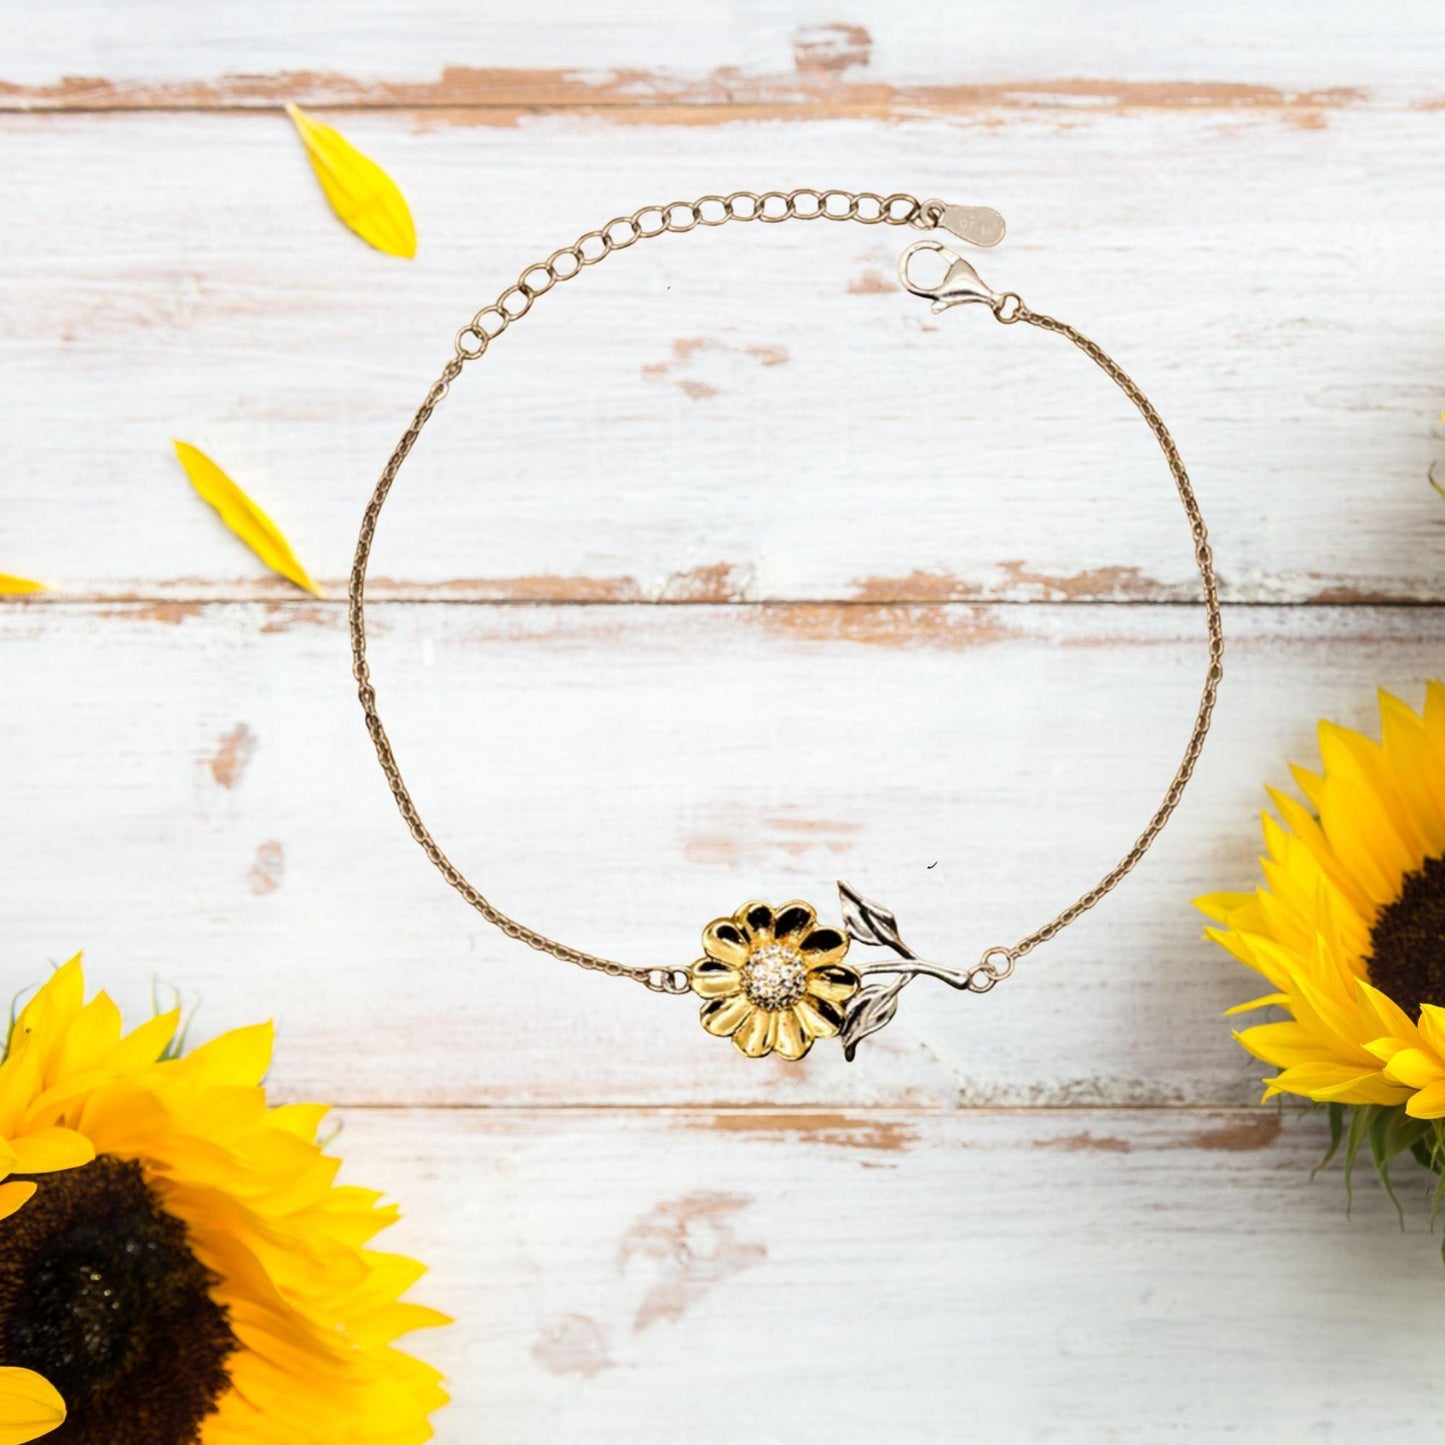 Remarkable Medical Assistant Gifts, Your dedication and hard work, Inspirational Birthday Christmas Unique Sunflower Bracelet For Medical Assistant, Coworkers, Men, Women, Friends - Mallard Moon Gift Shop